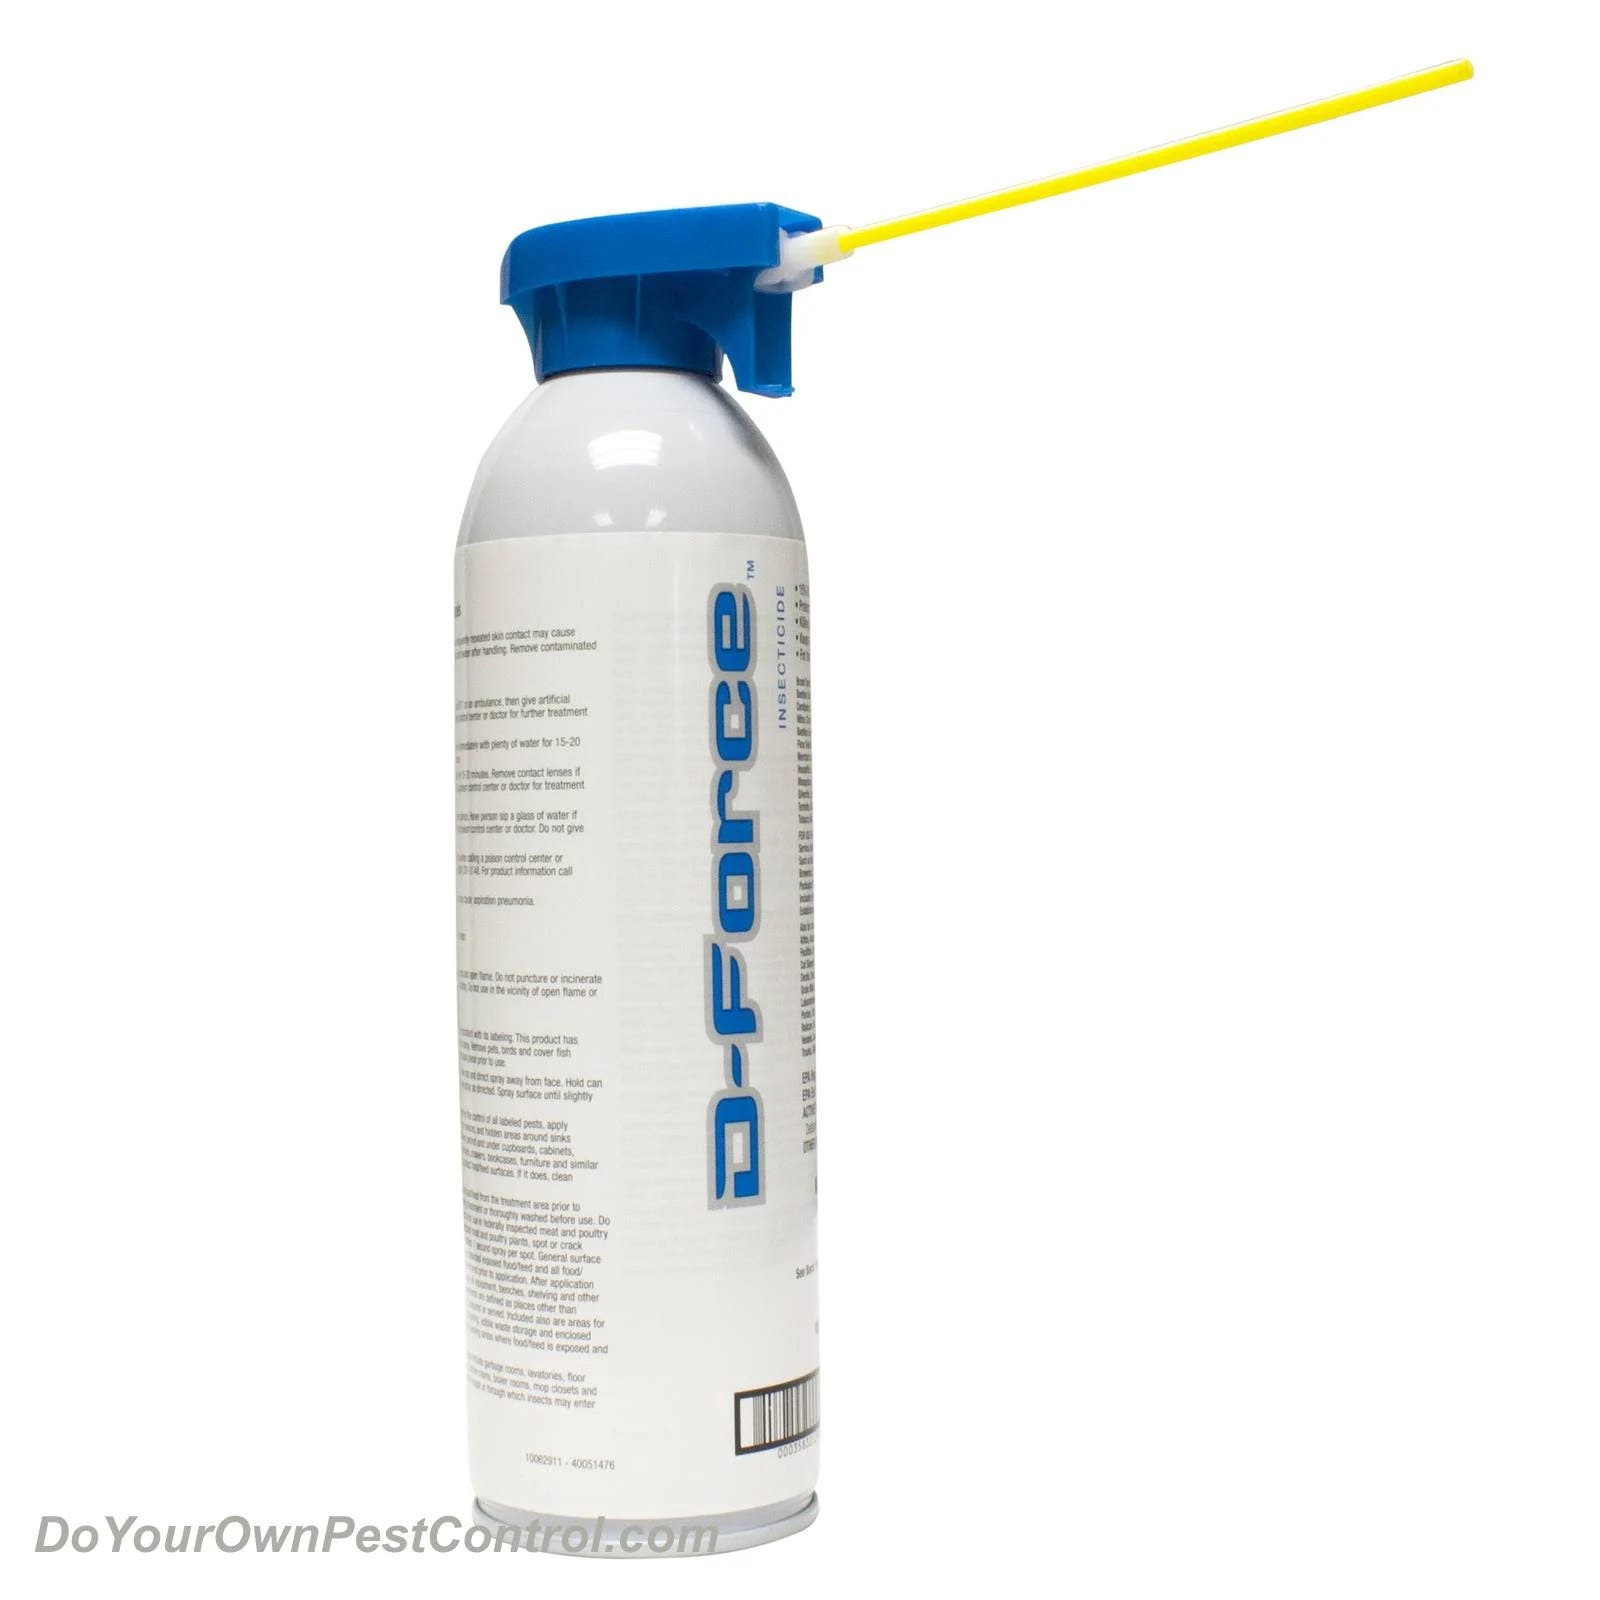 FMC D-Force Insecticide: Effective Roach Spray for Pest Control | Image